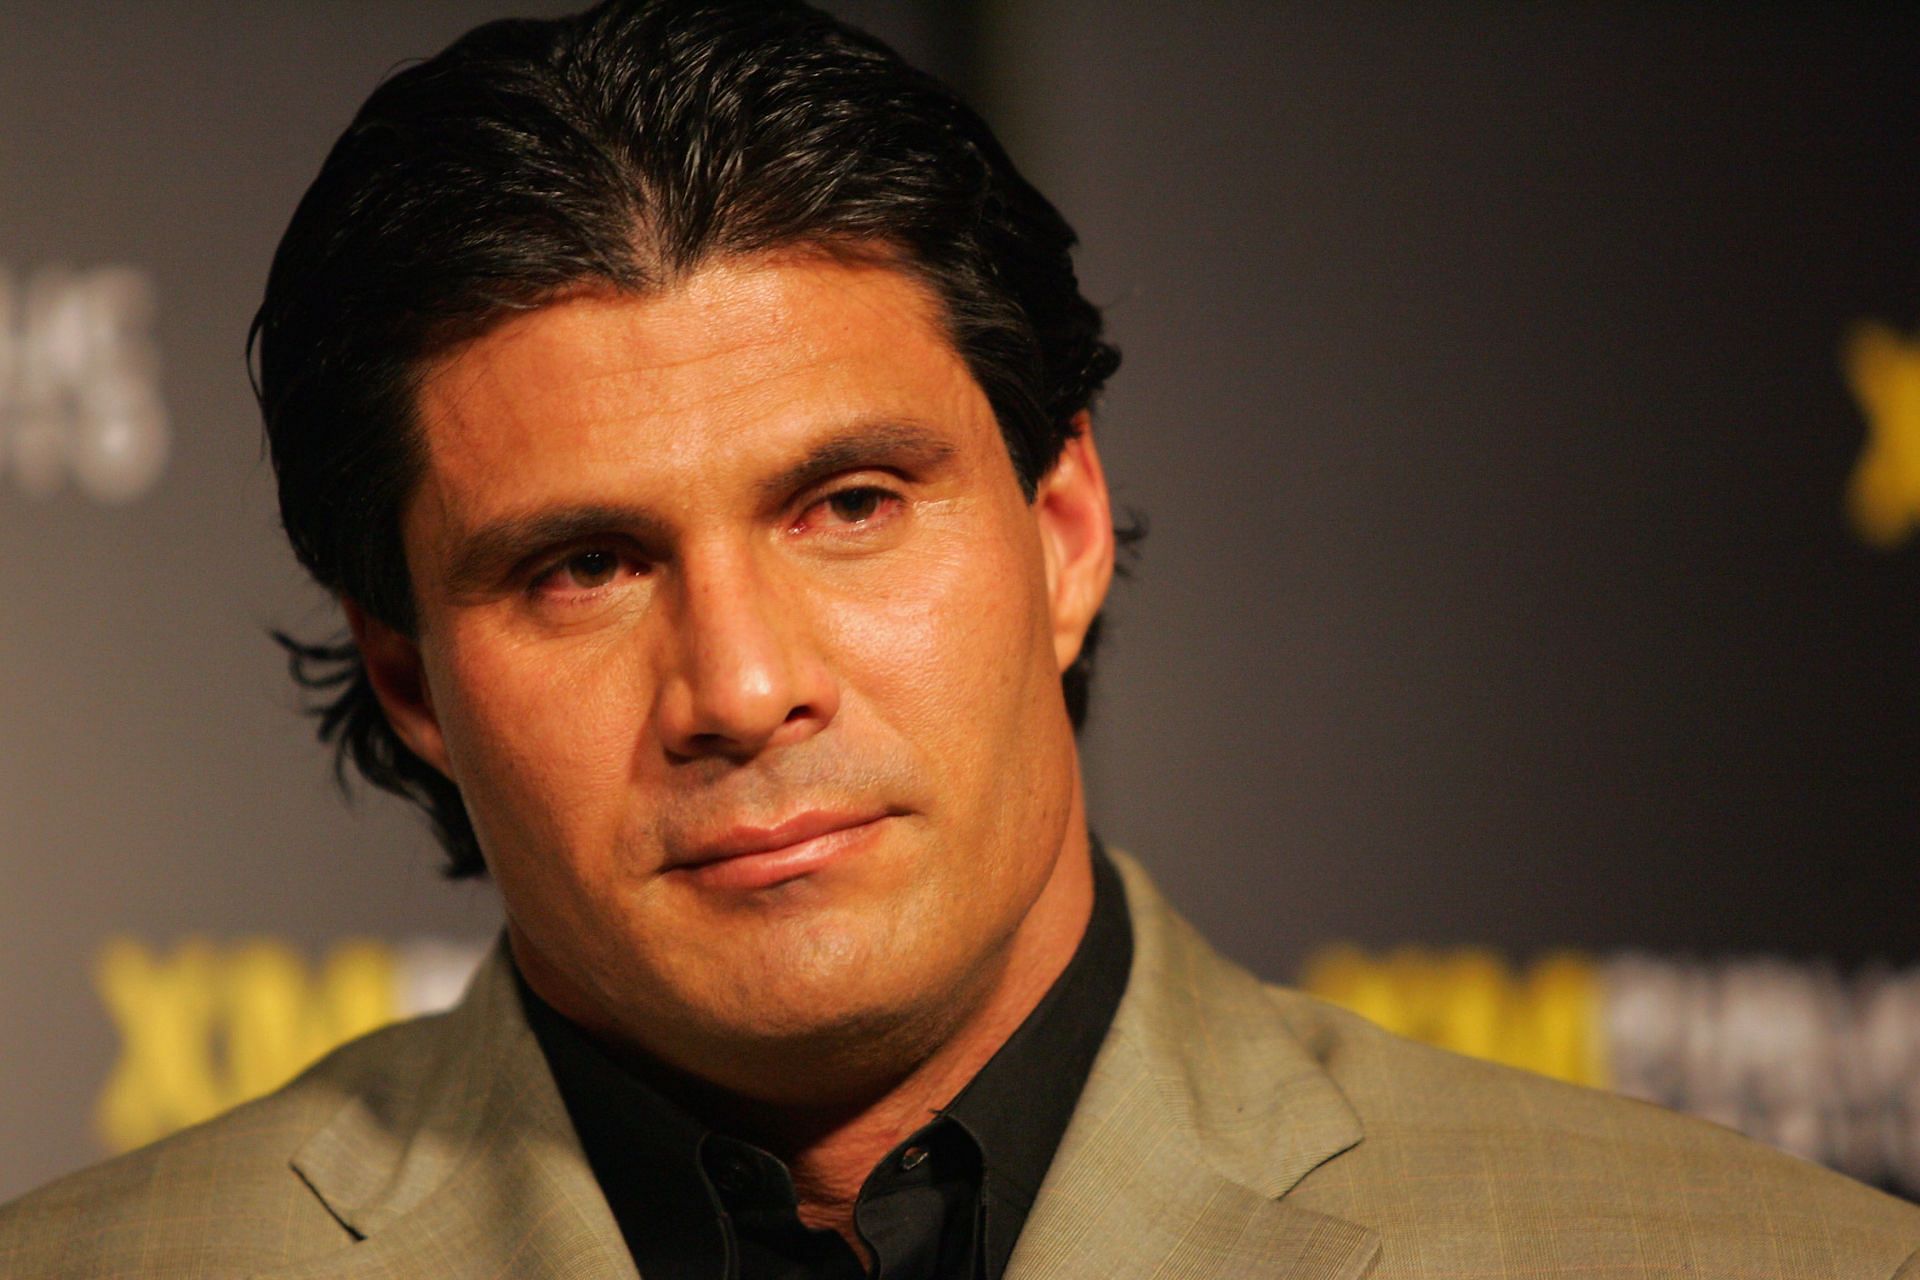 Former Major League Baseball player Jose Canseco discusses steroid use during a town hall meeting and news conference on March 16, 2005, at XM Satellite headquarters in Washington, DC. (Photo By Jamie Squire/Getty Images)